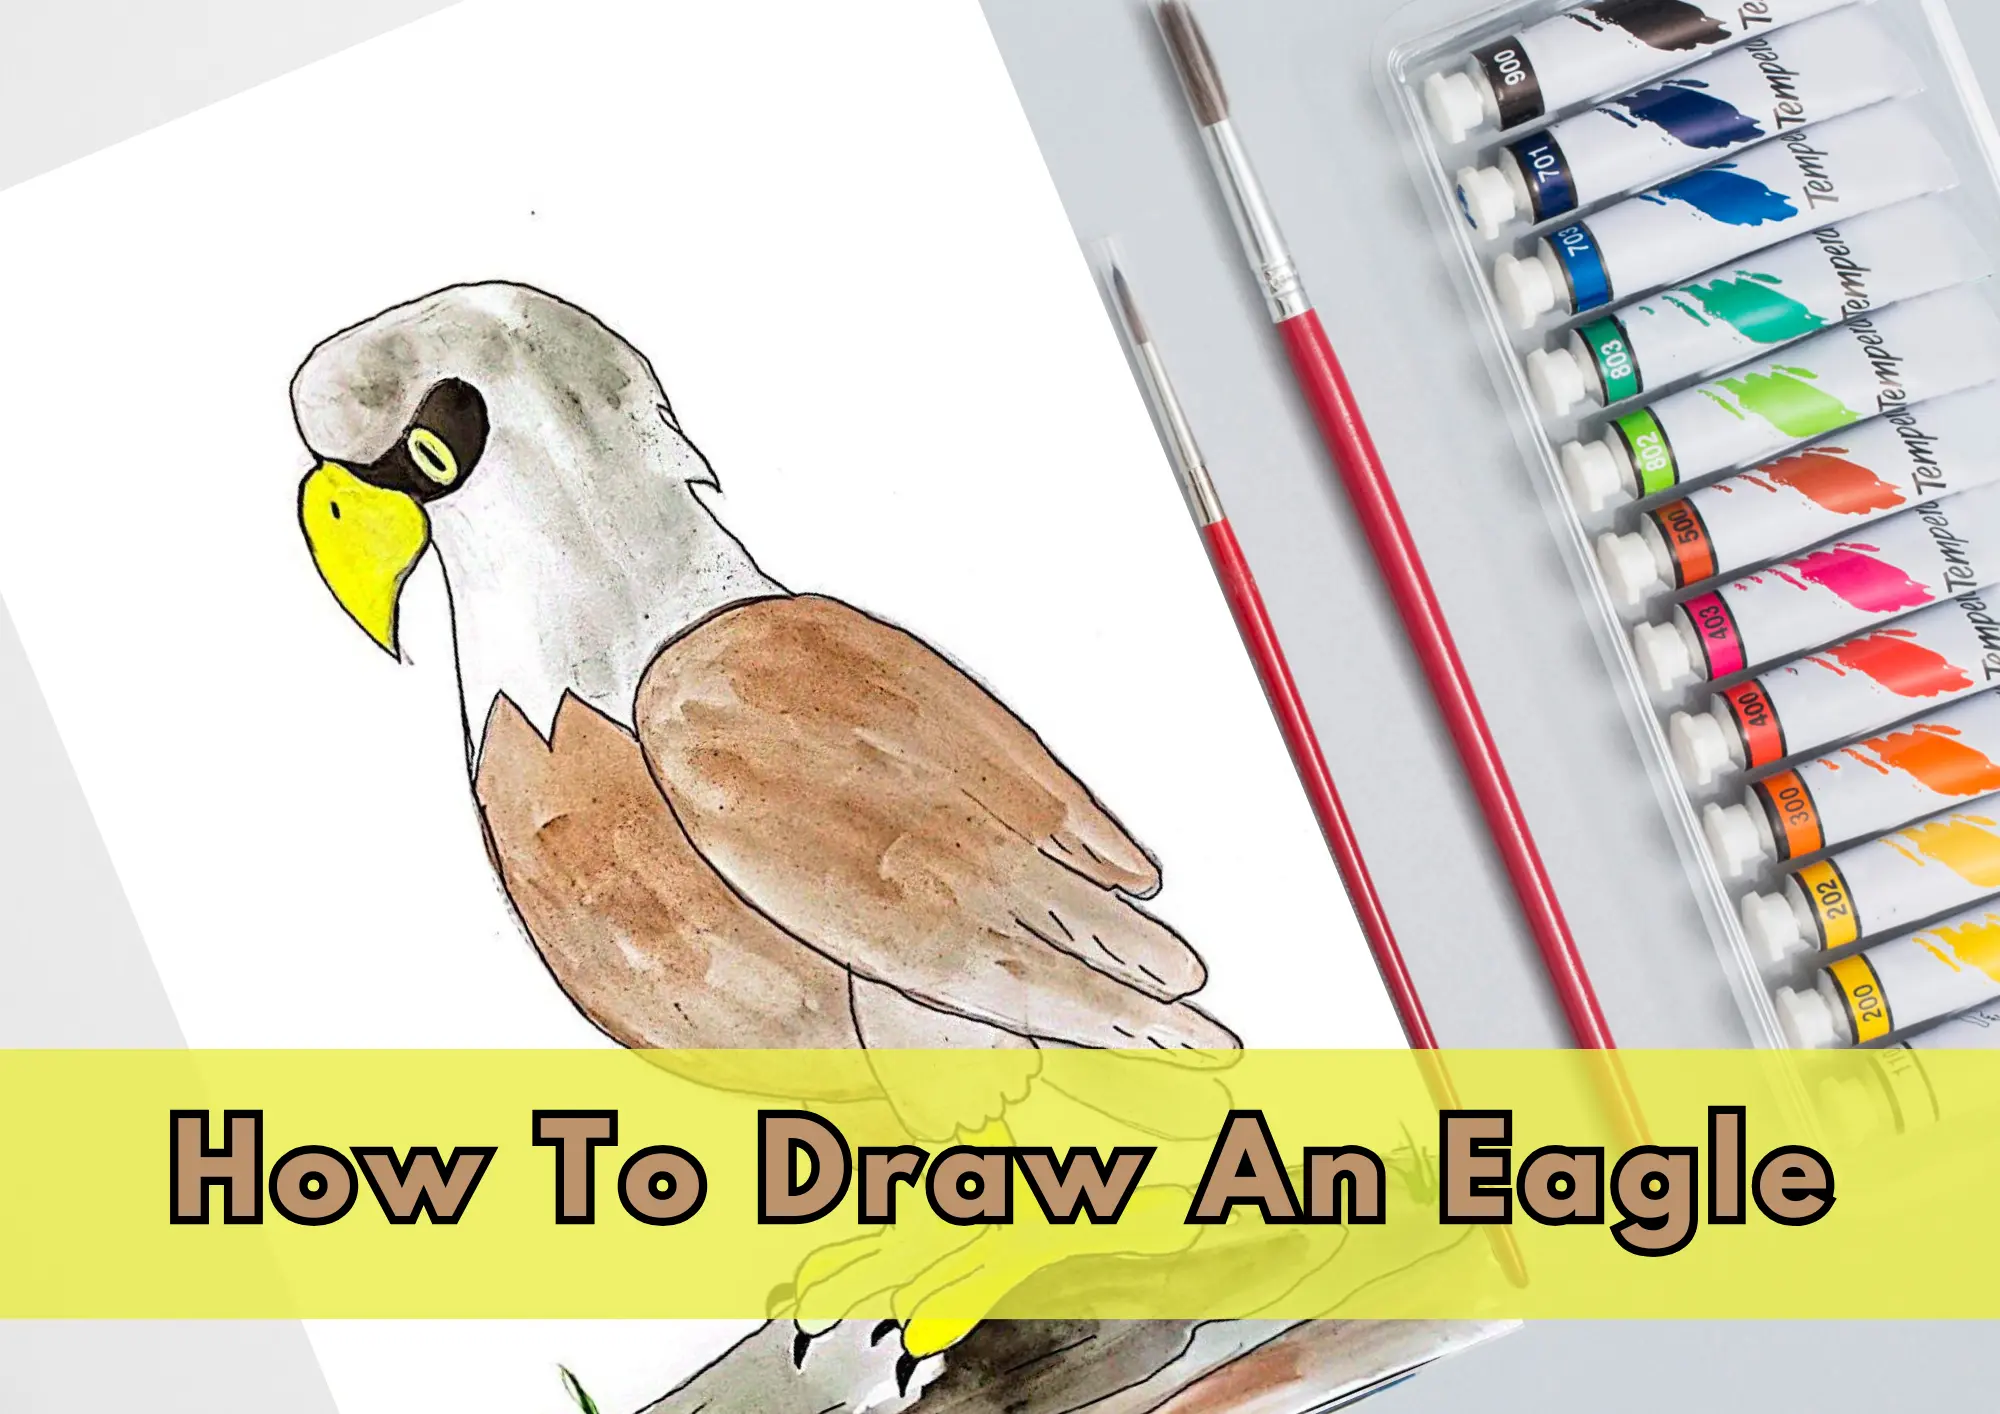 How to draw Eagle Head step by step - YouTube